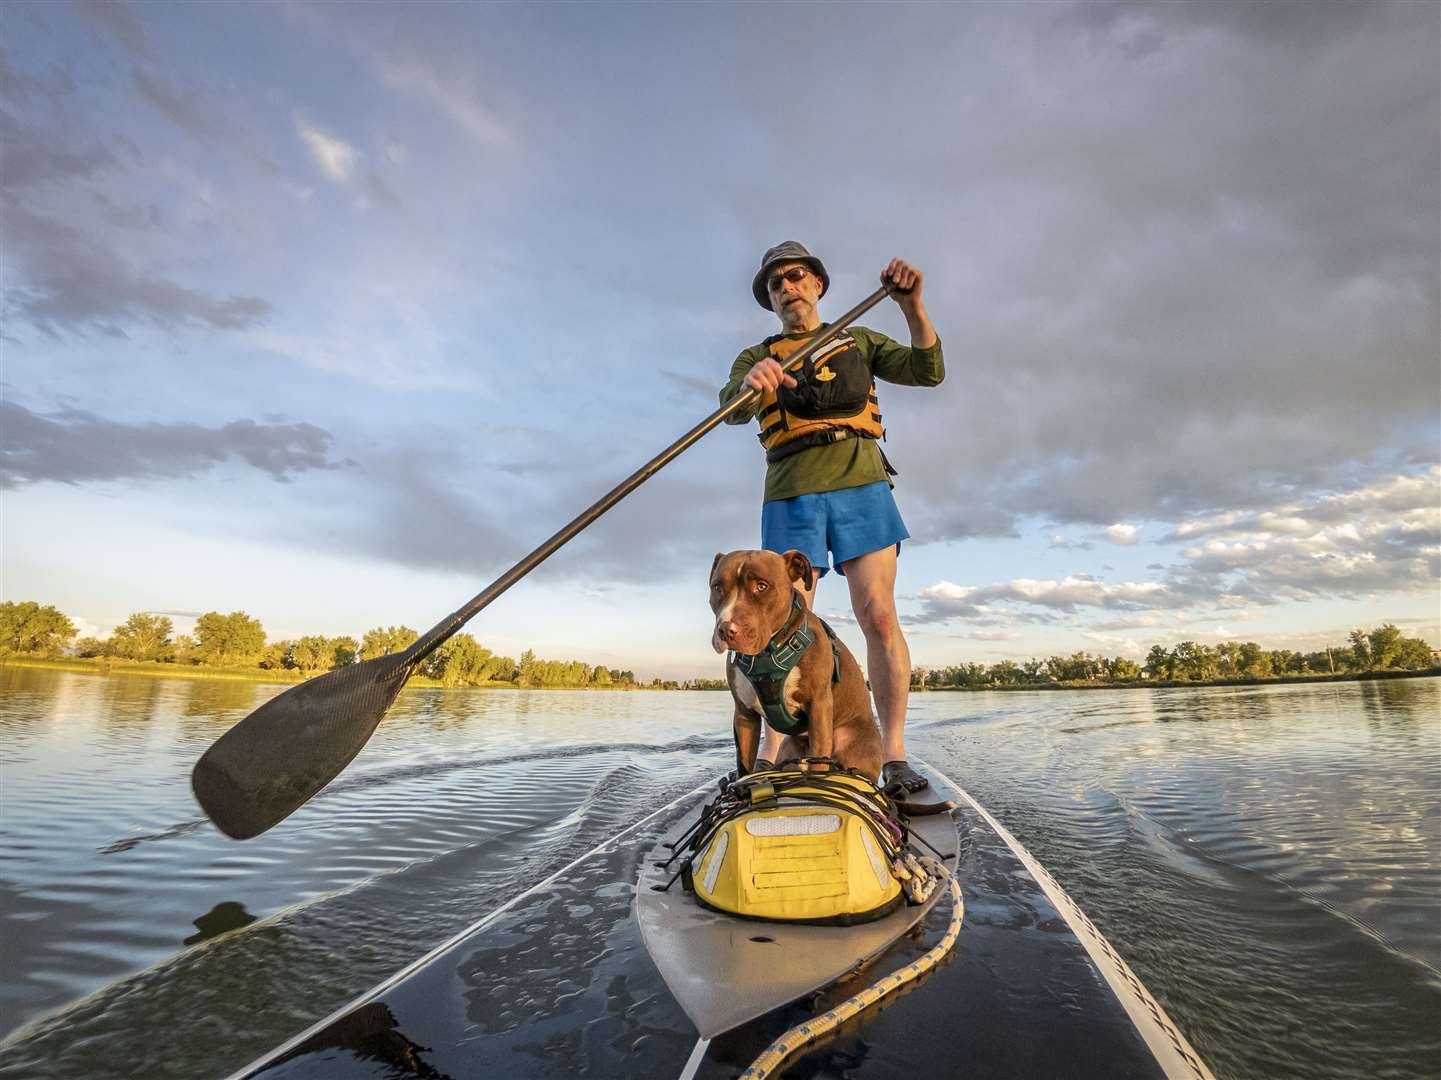 Did you know you can go paddle boarding with your dog?